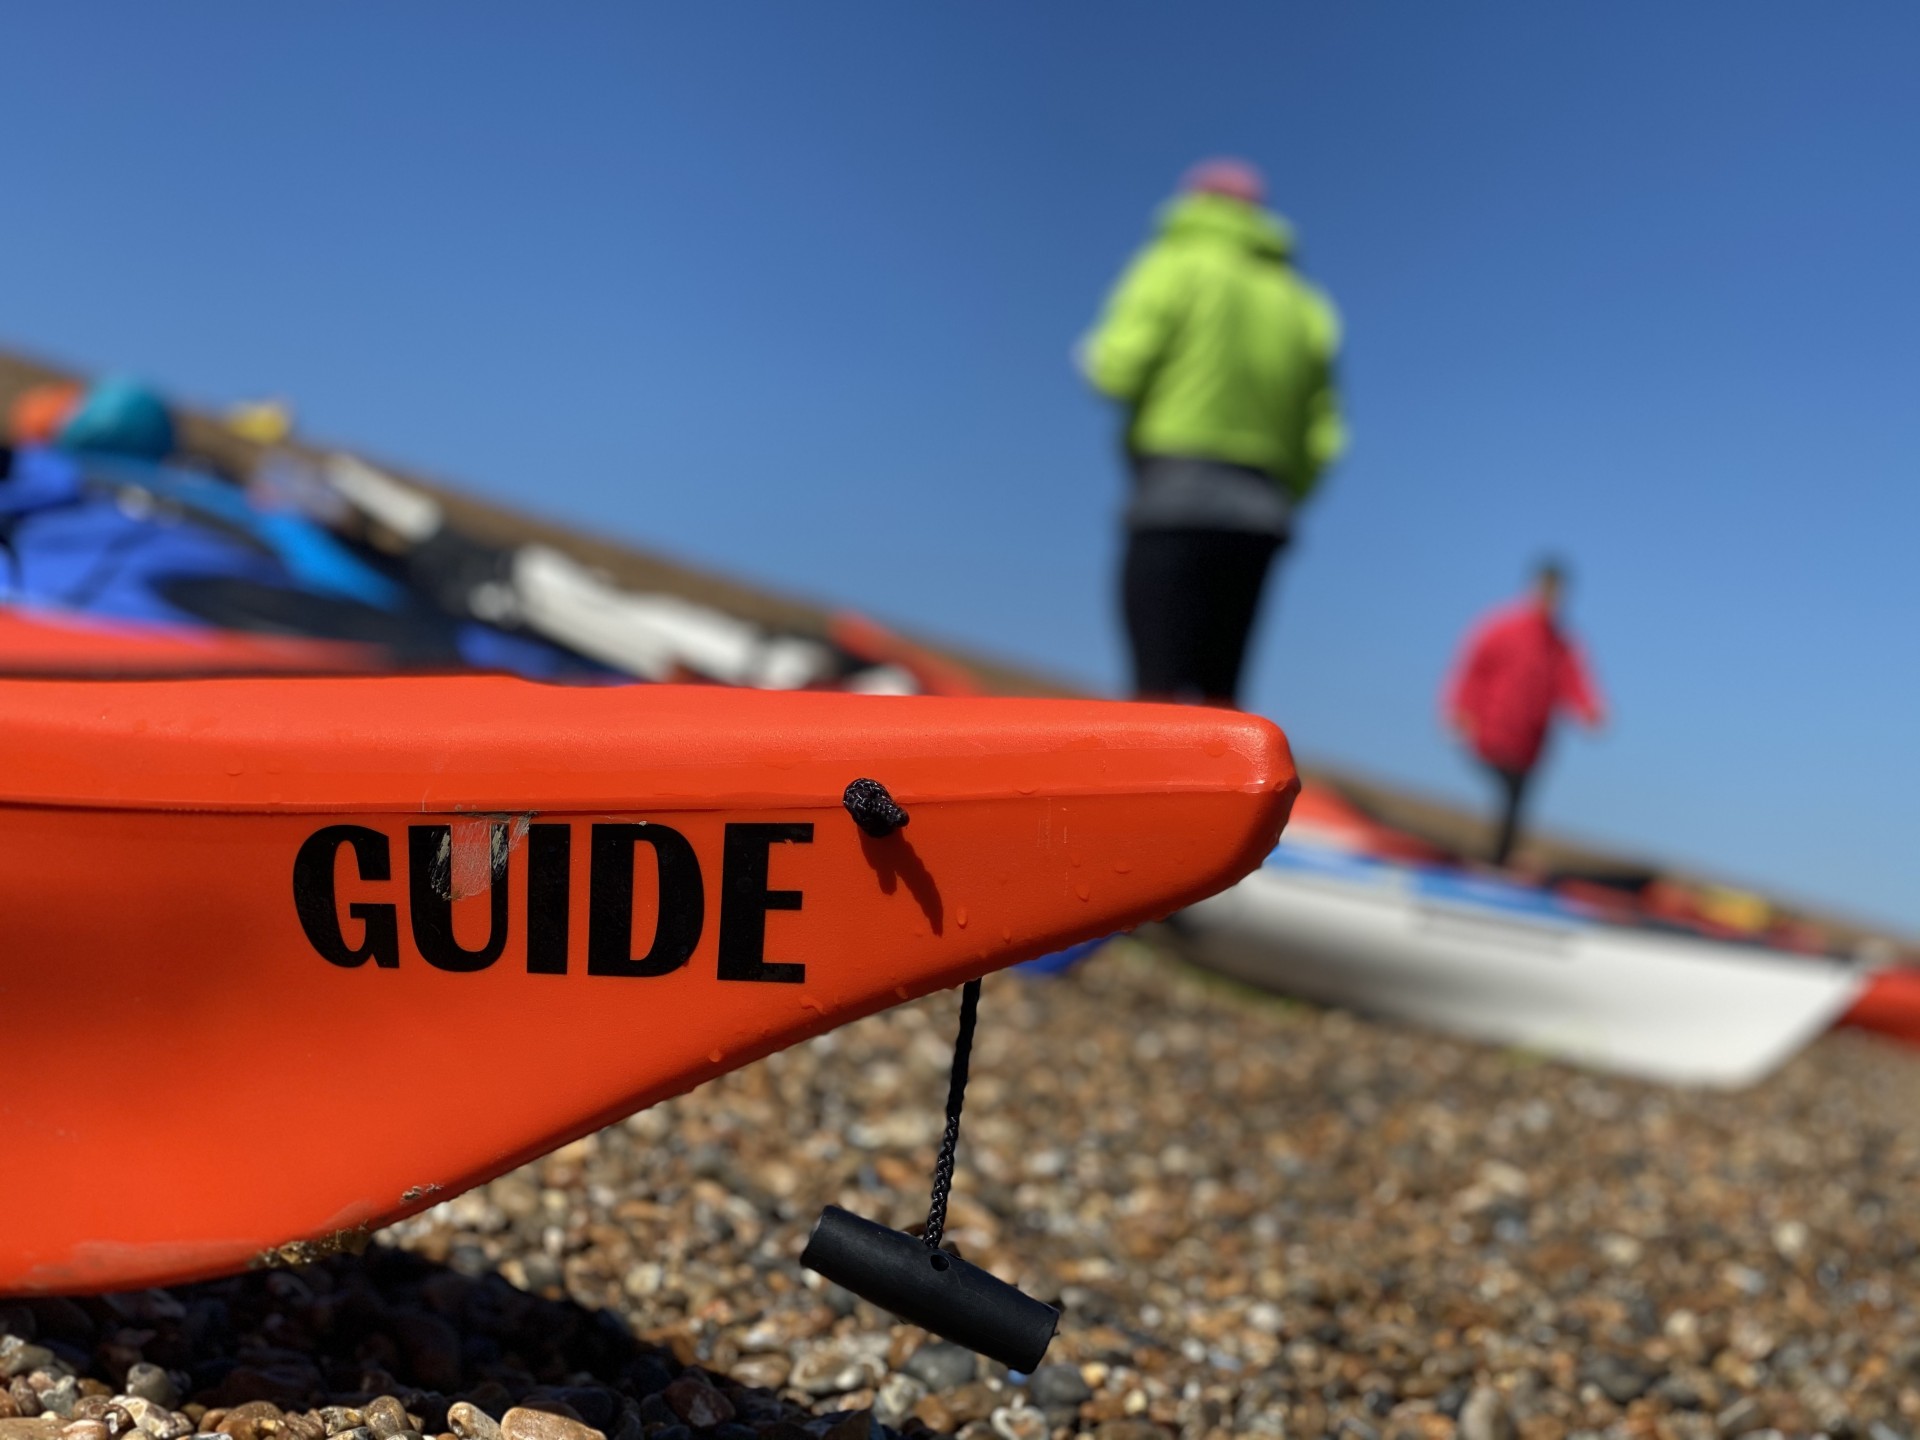 The front of the sea kayak with the the word 'Guide' printed on the bow.